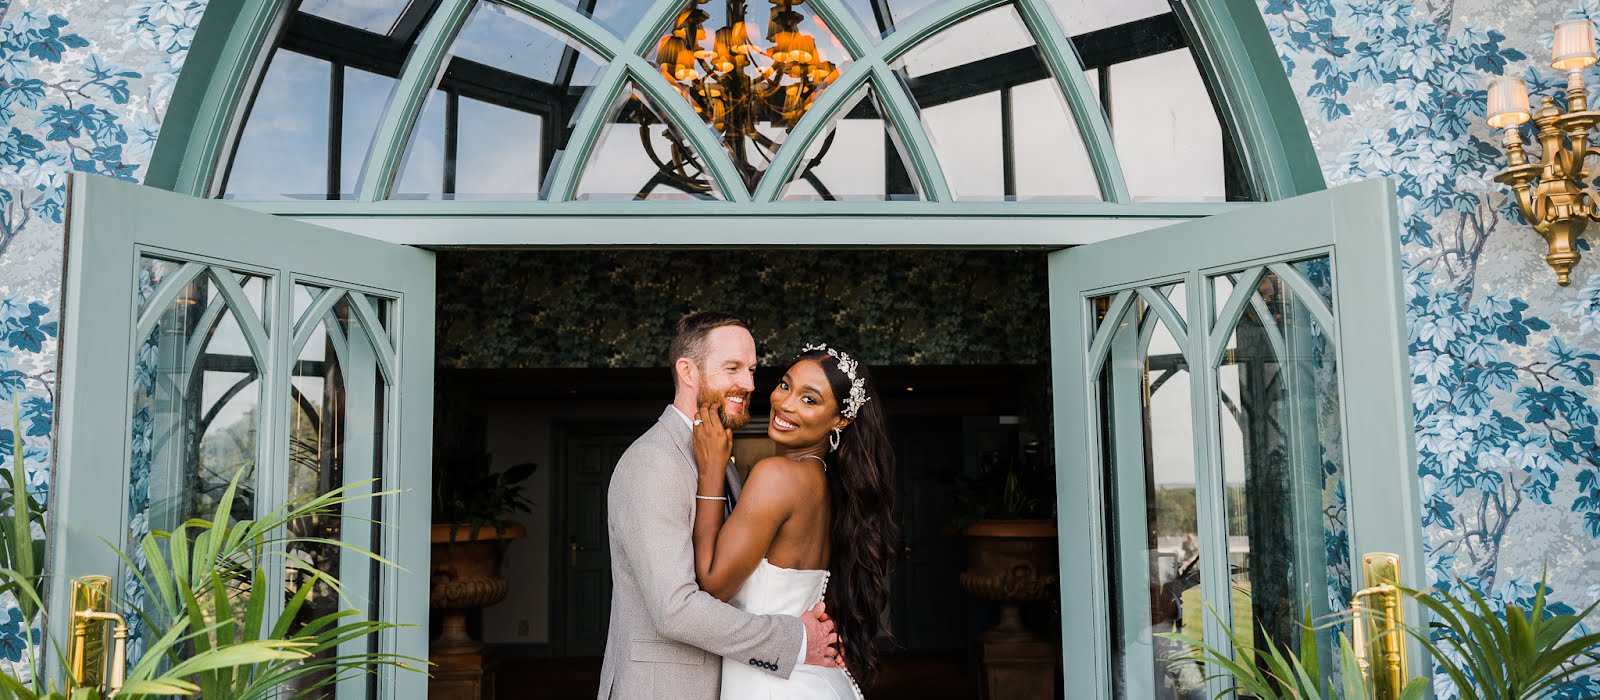 Real Weddings: Nnenna and Gary tie the knot at the gorgeous Glenlo Abbey in Co Galway